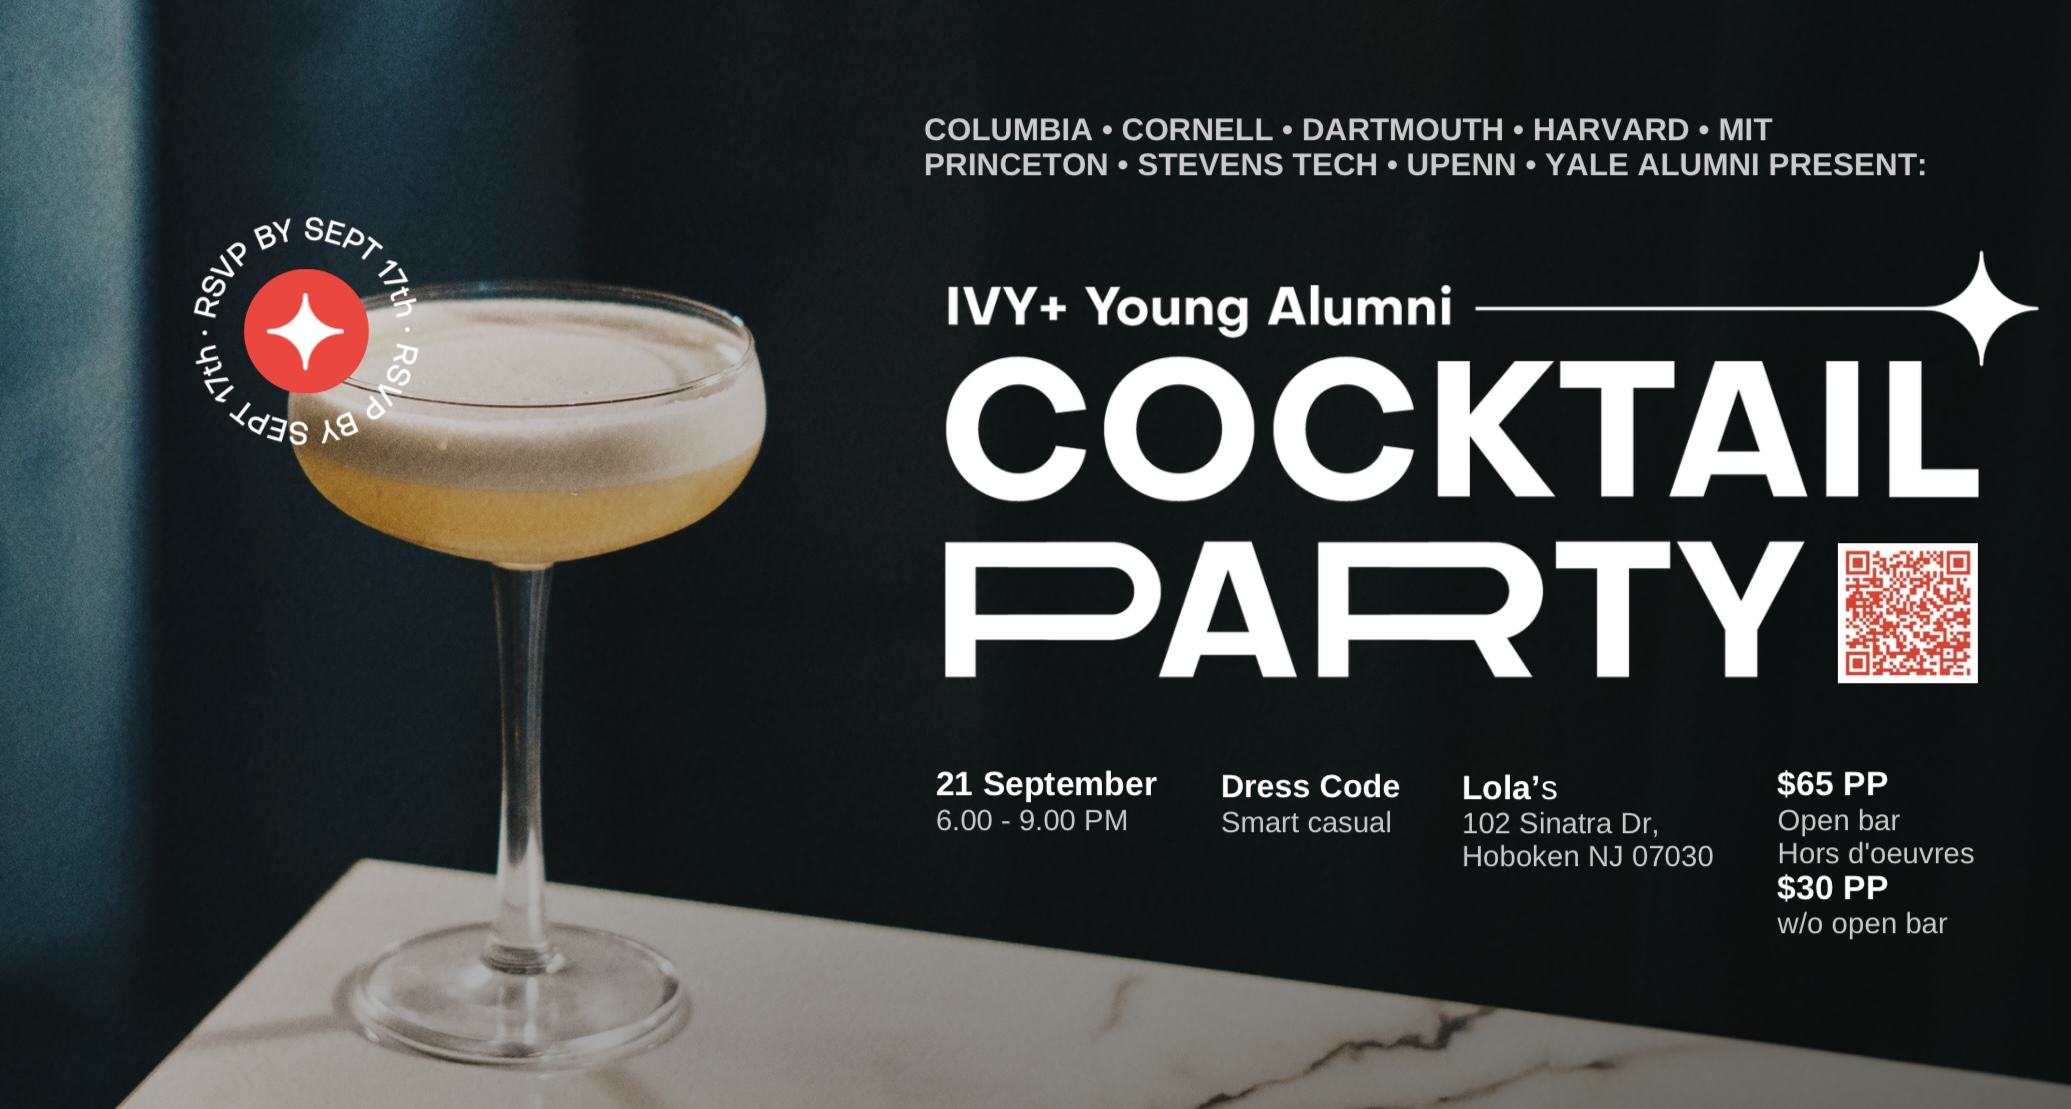 Ivy+ Cocktail Party